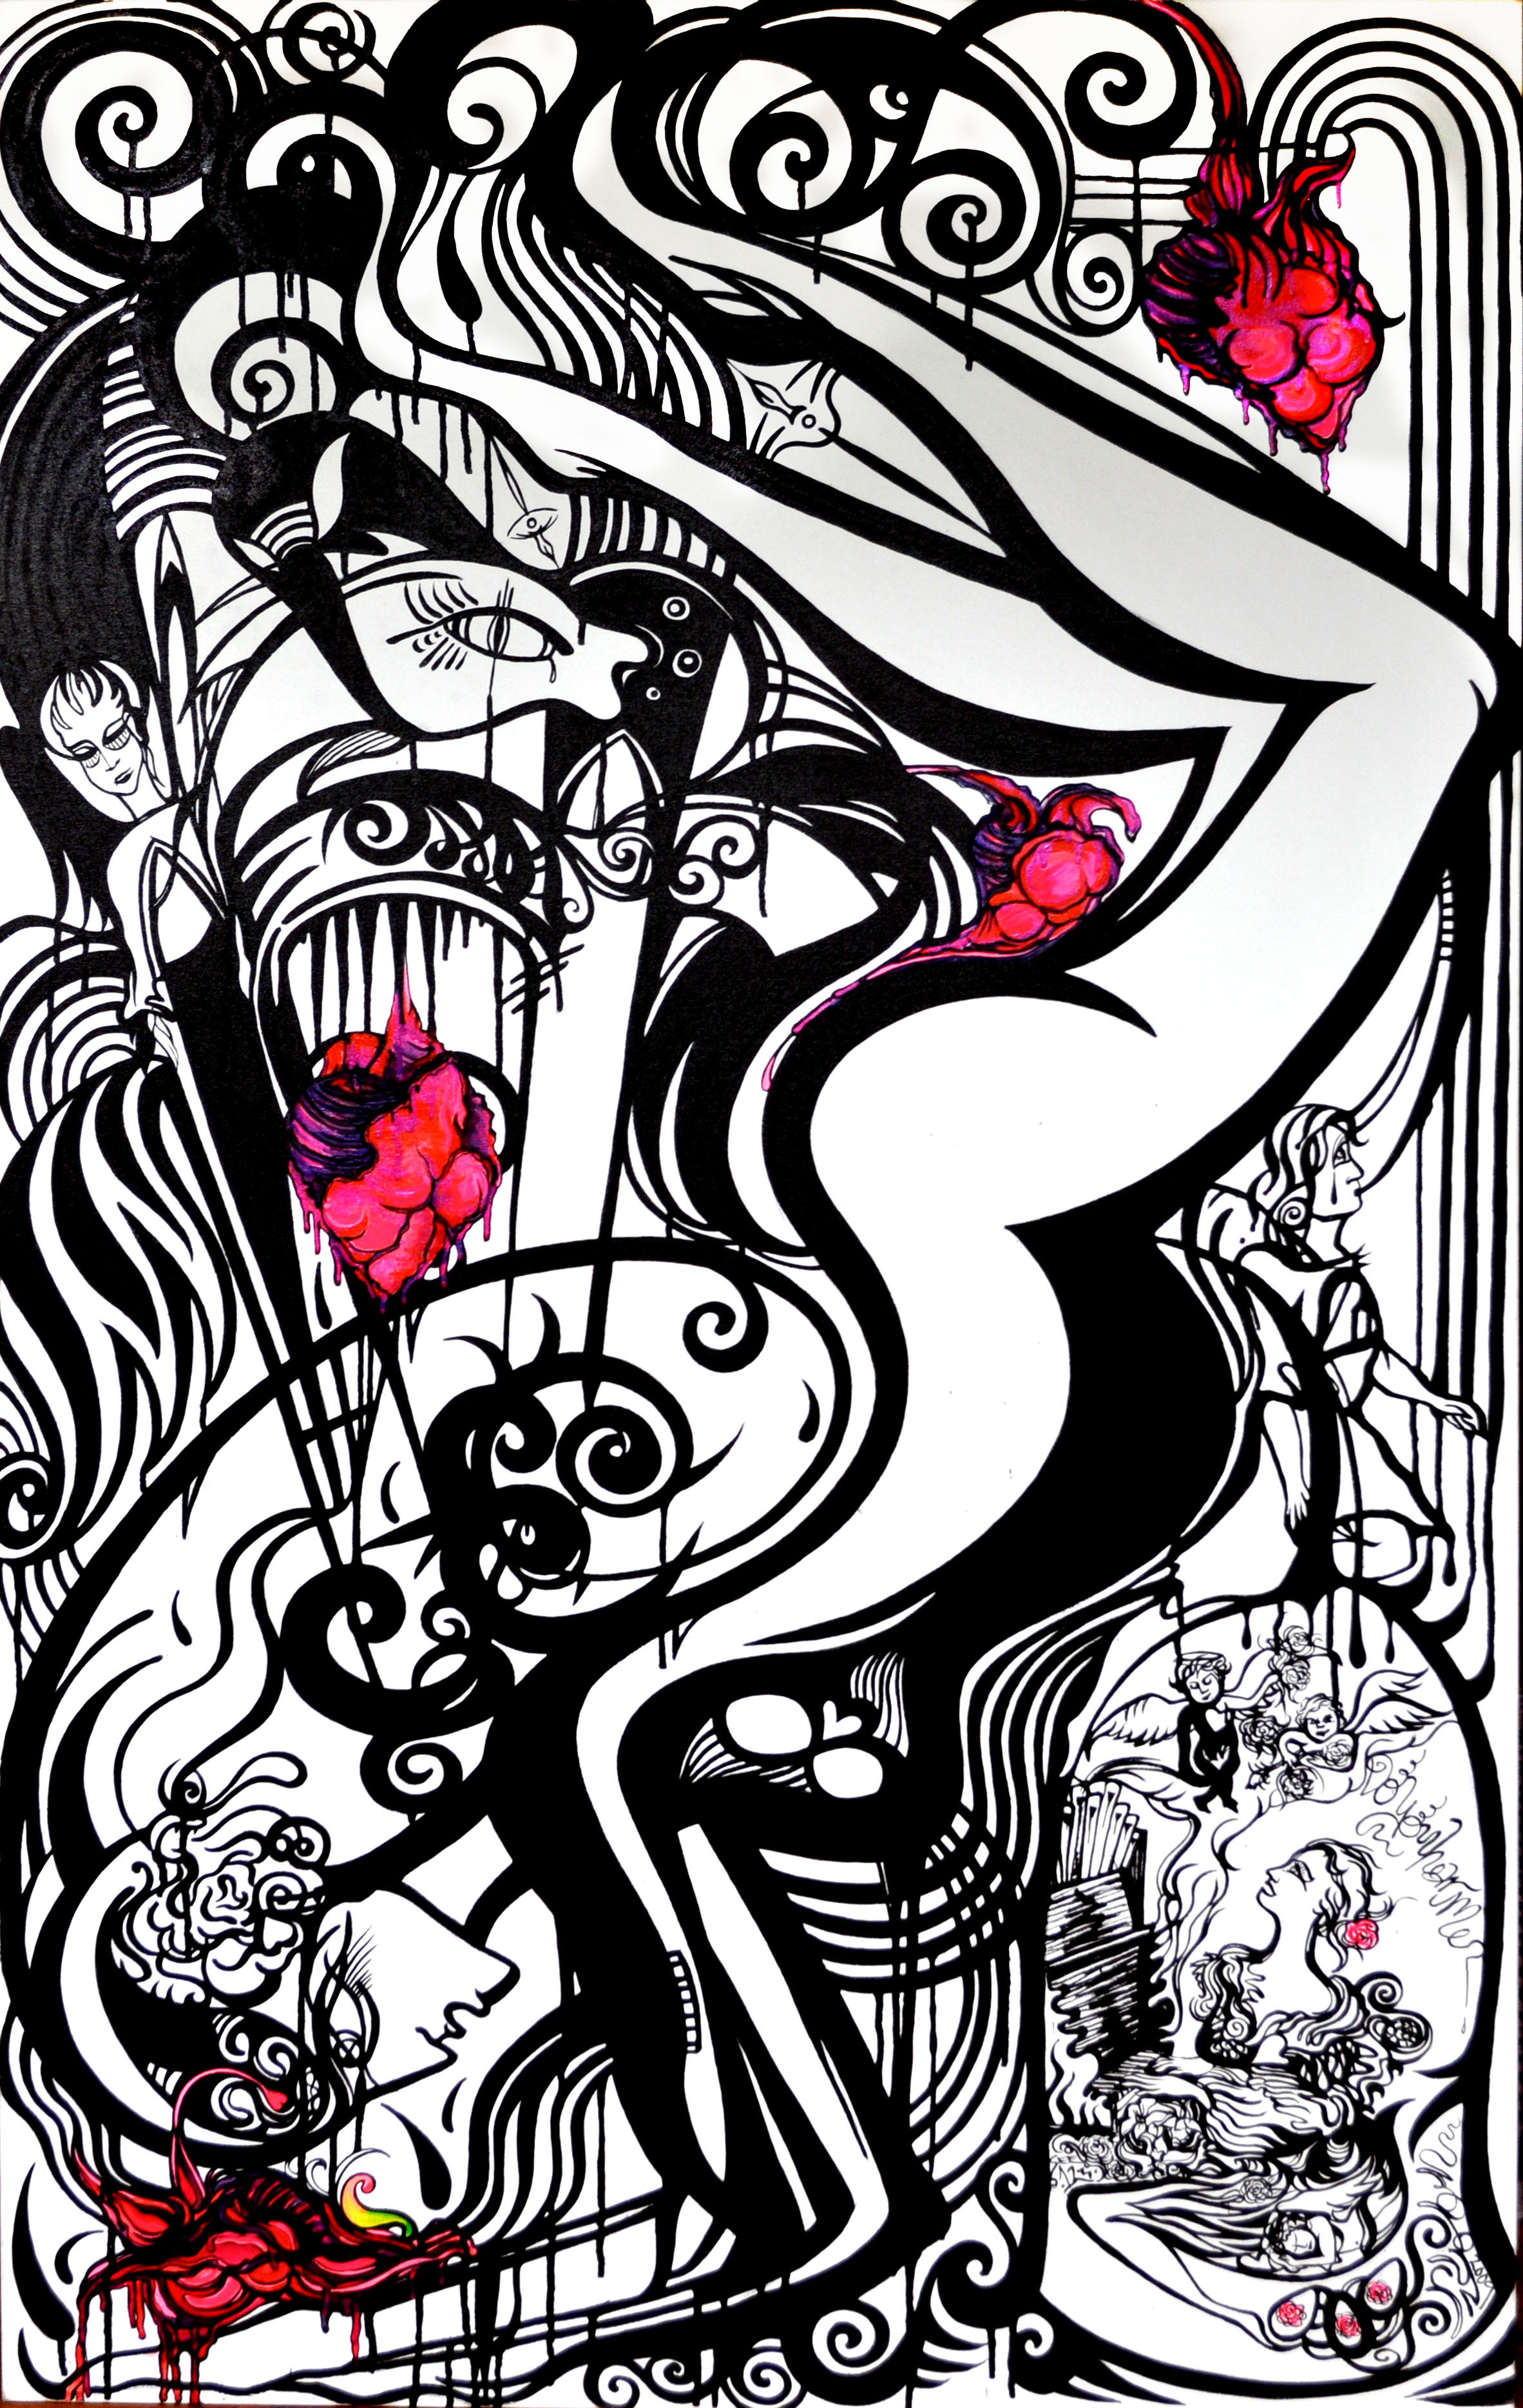   Grand Piano  | India Ink &amp; Gouache on Canvas | 4'x6' | 2010 